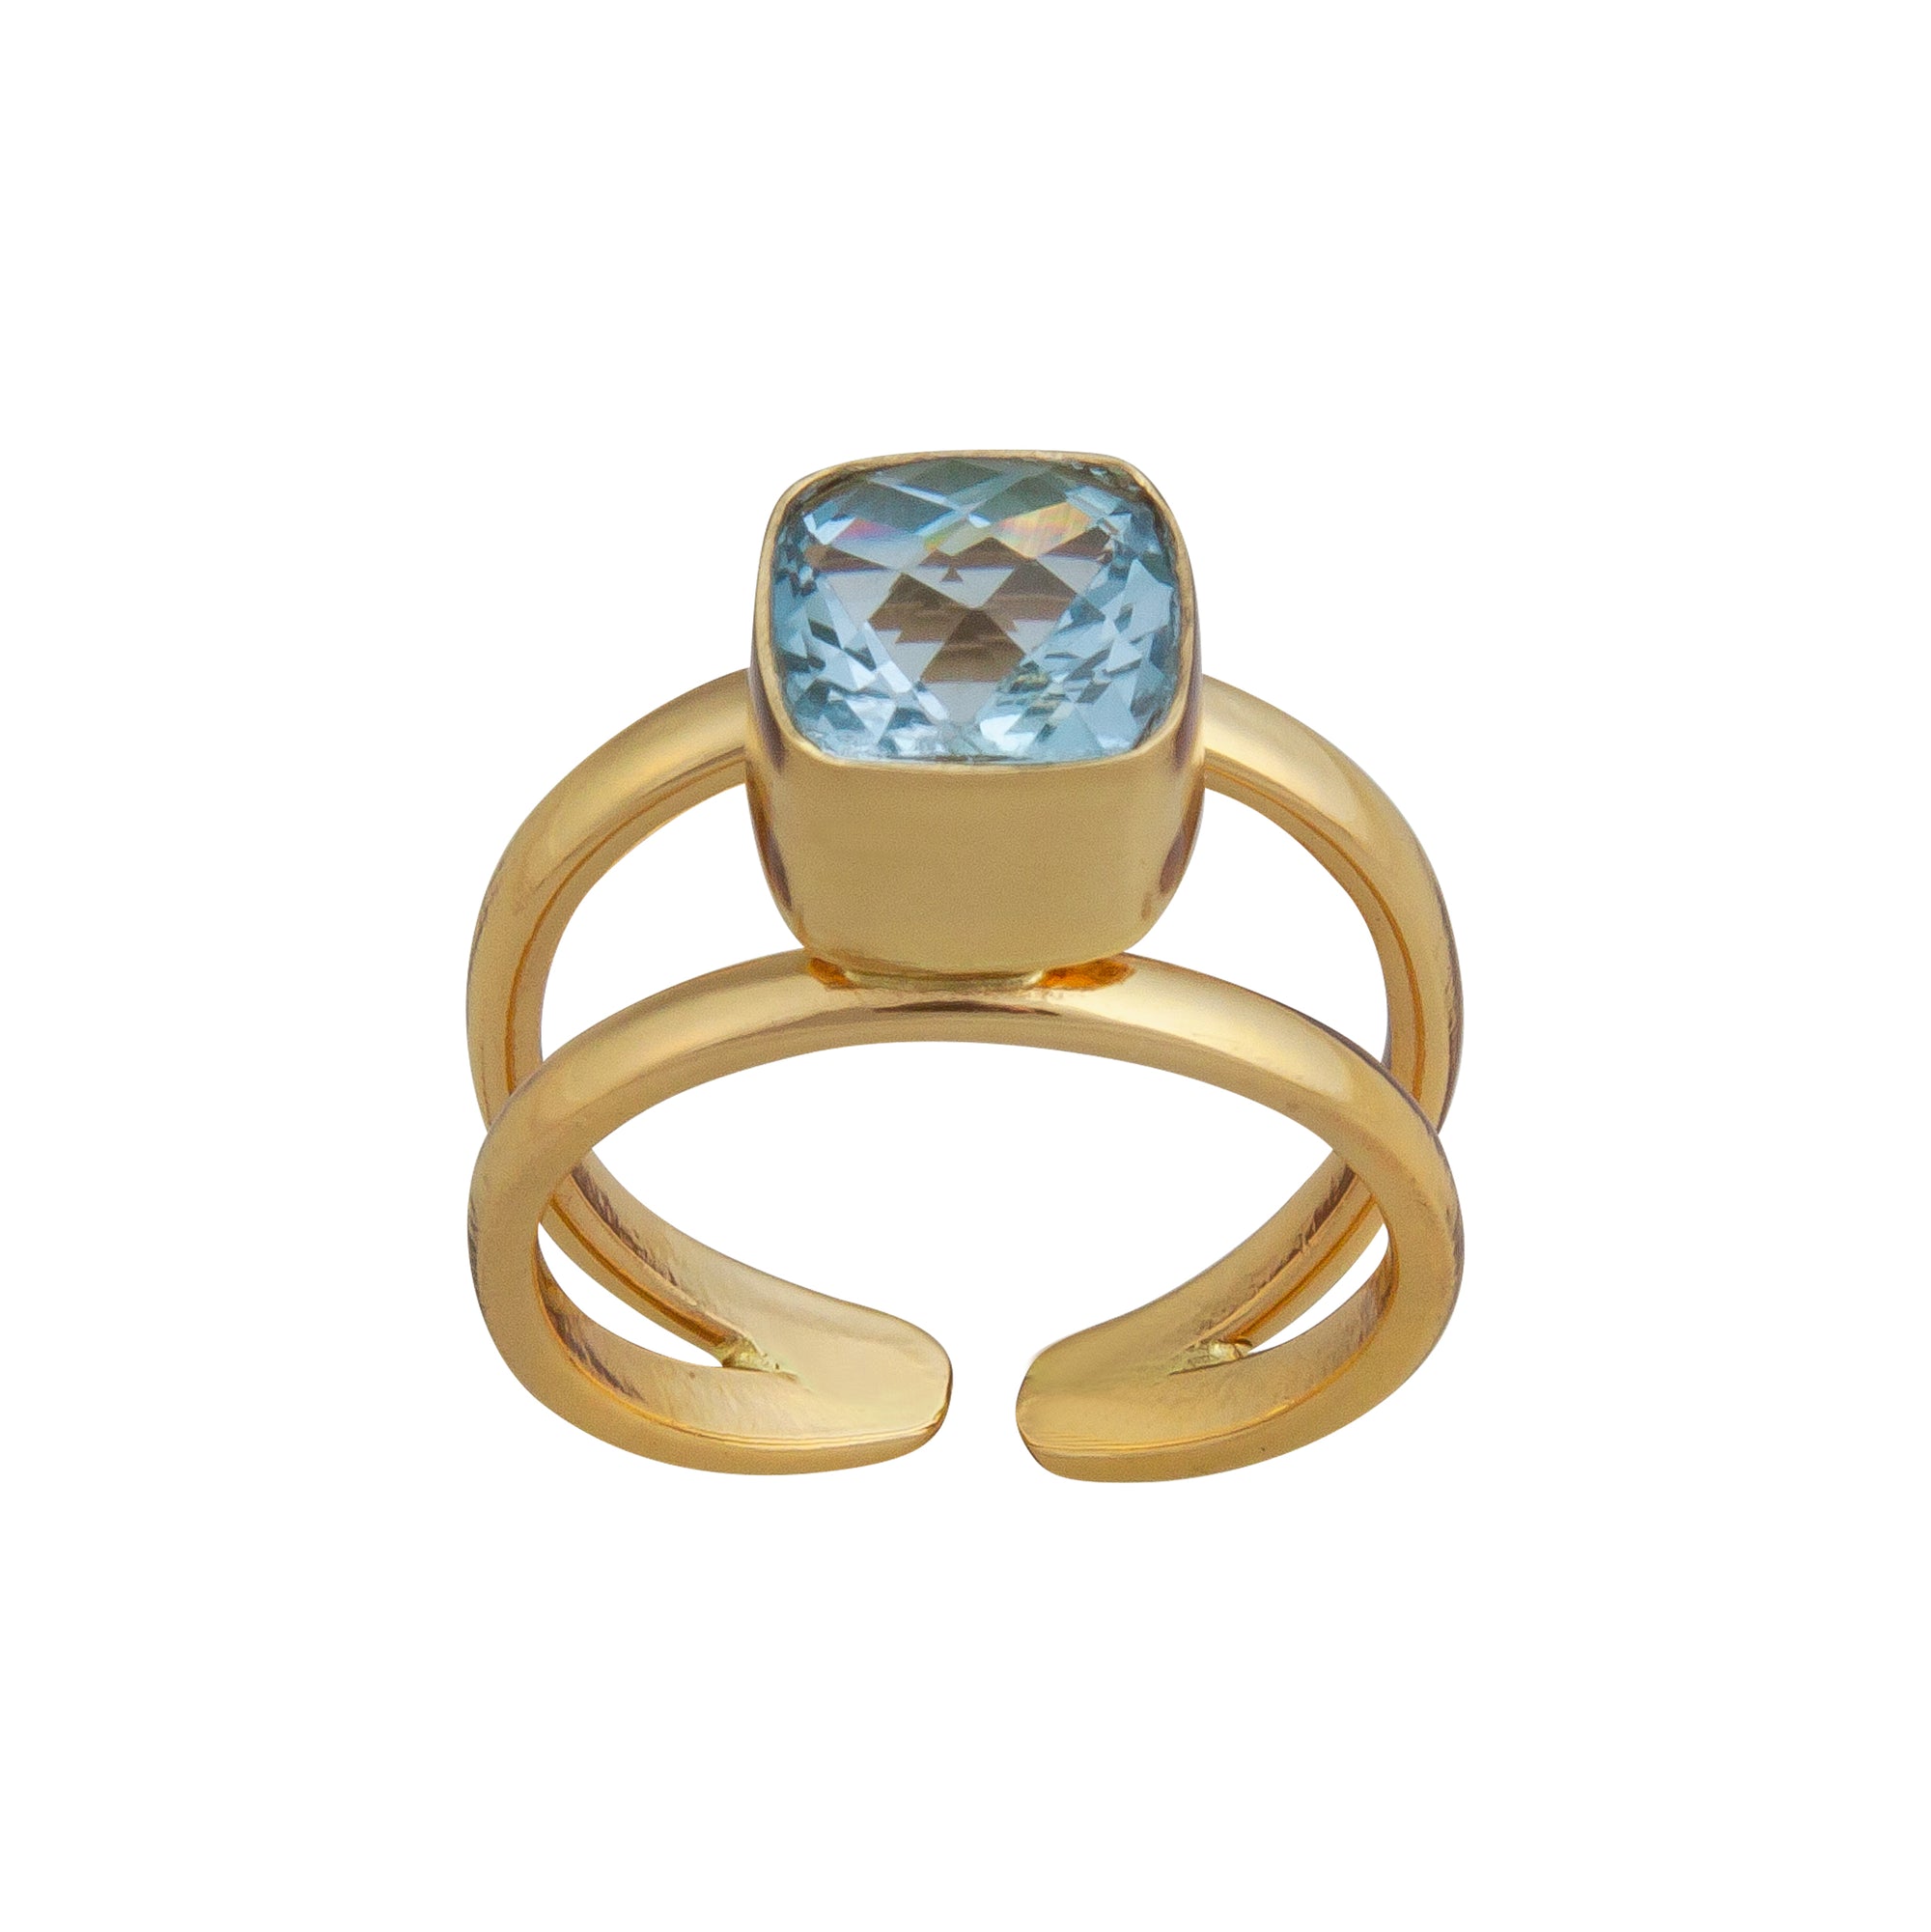 Alchemia Blue Topaz Double Band Adjustable Ring - Charles Albert Jewelry